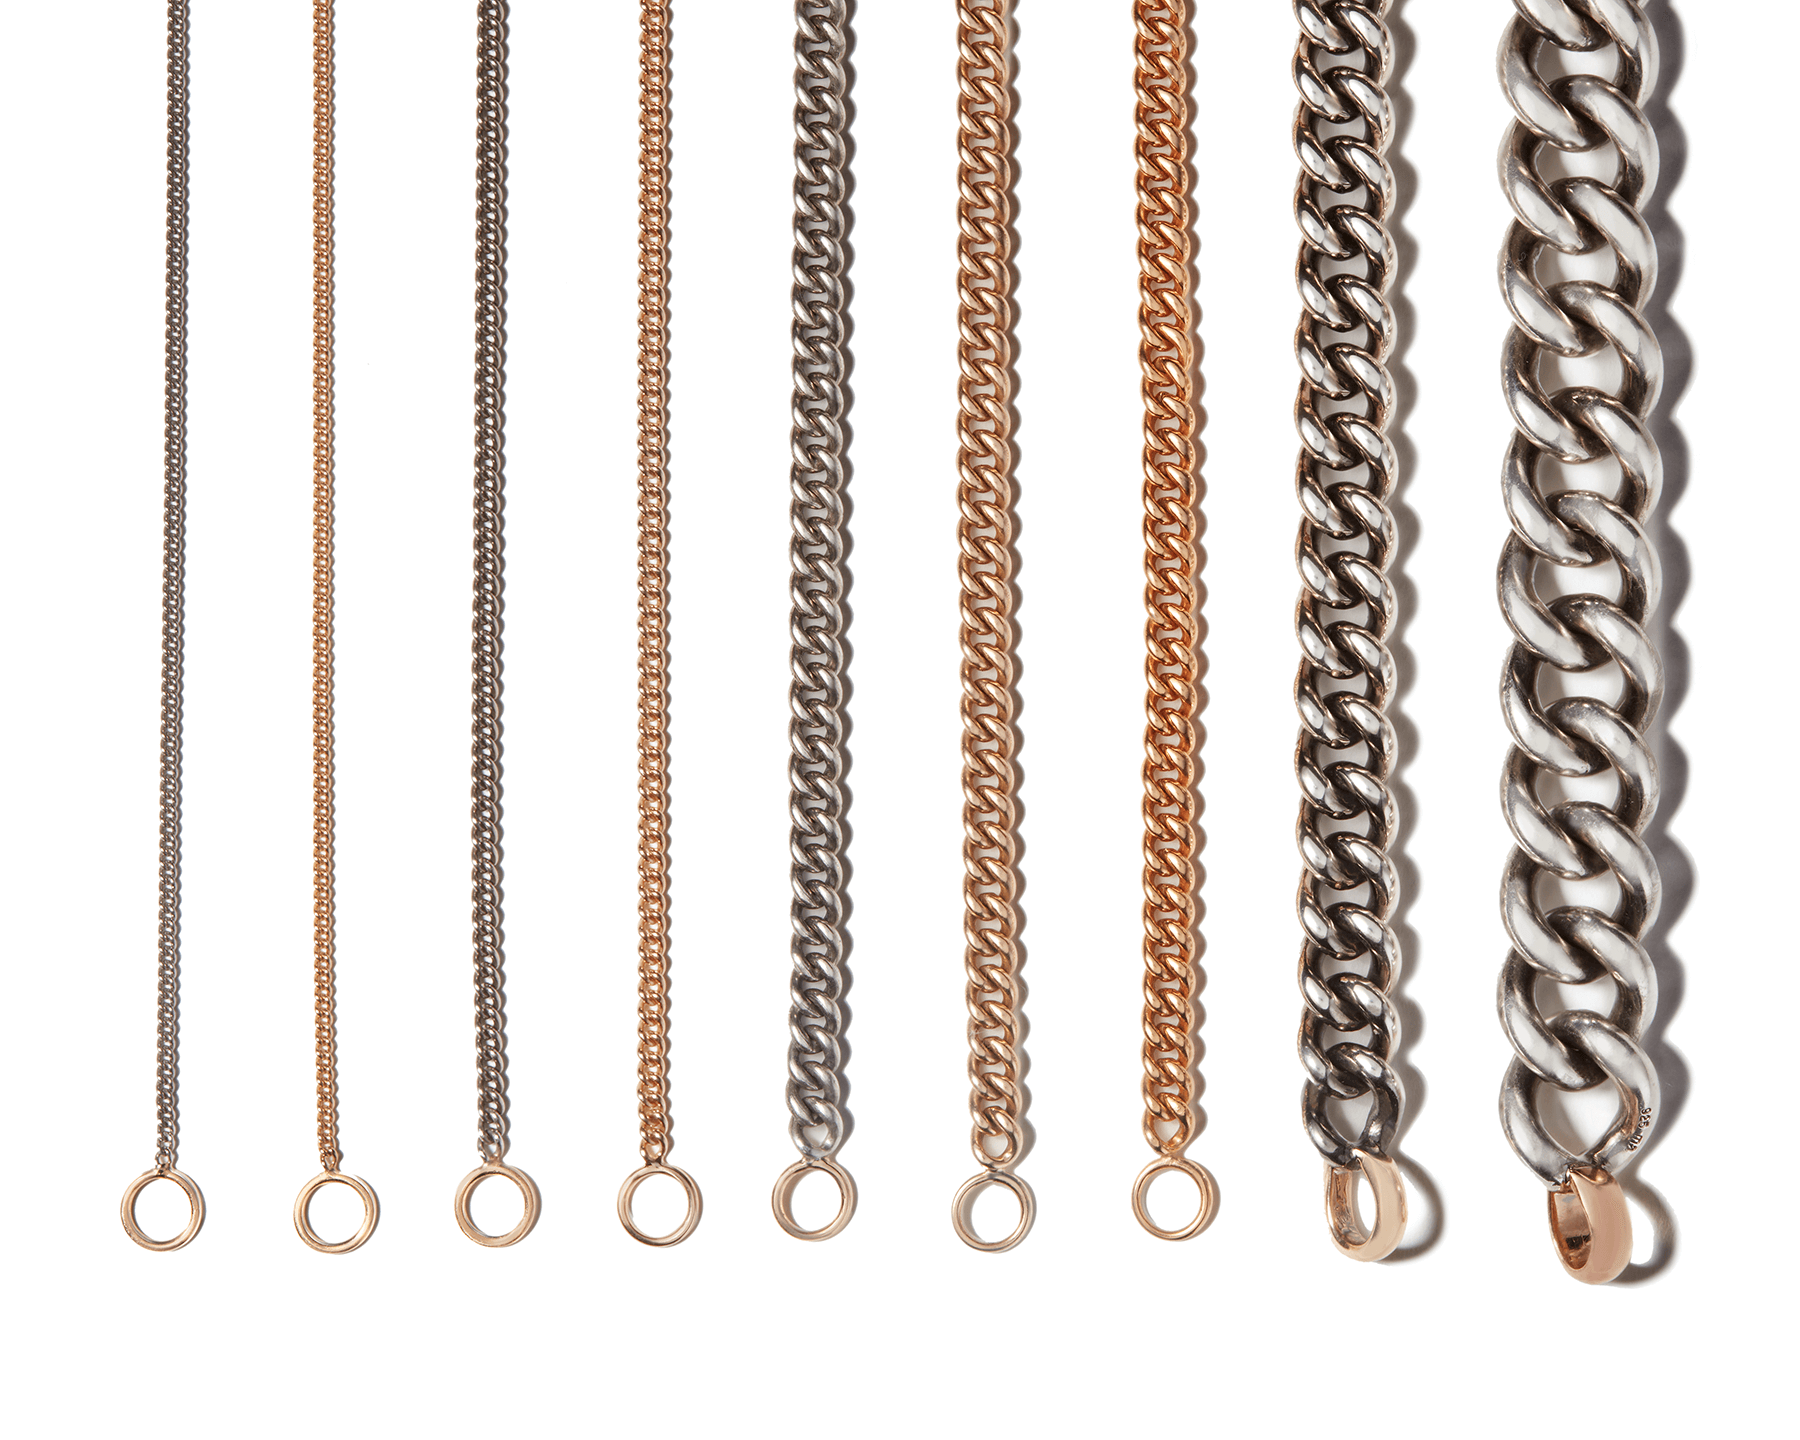 Line up of nine different curb chain necklace thicknesses against white backdrop